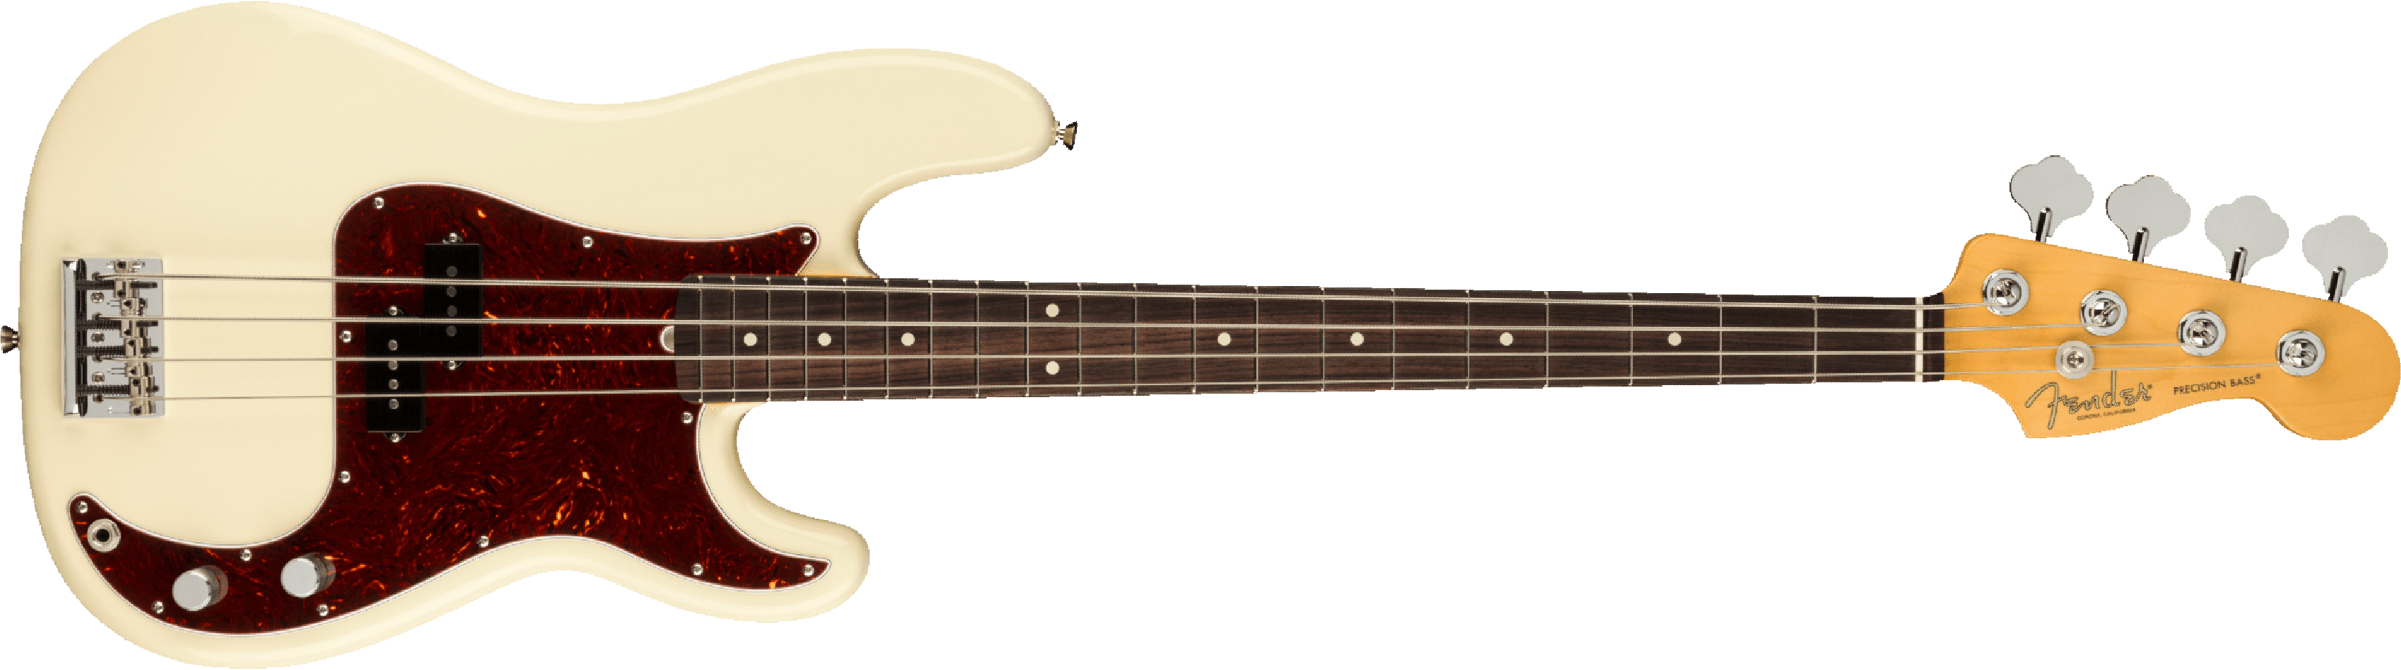 Fender Precision Bass American Professional Ii Usa Rw - Olympic White - Solidbody E-bass - Main picture